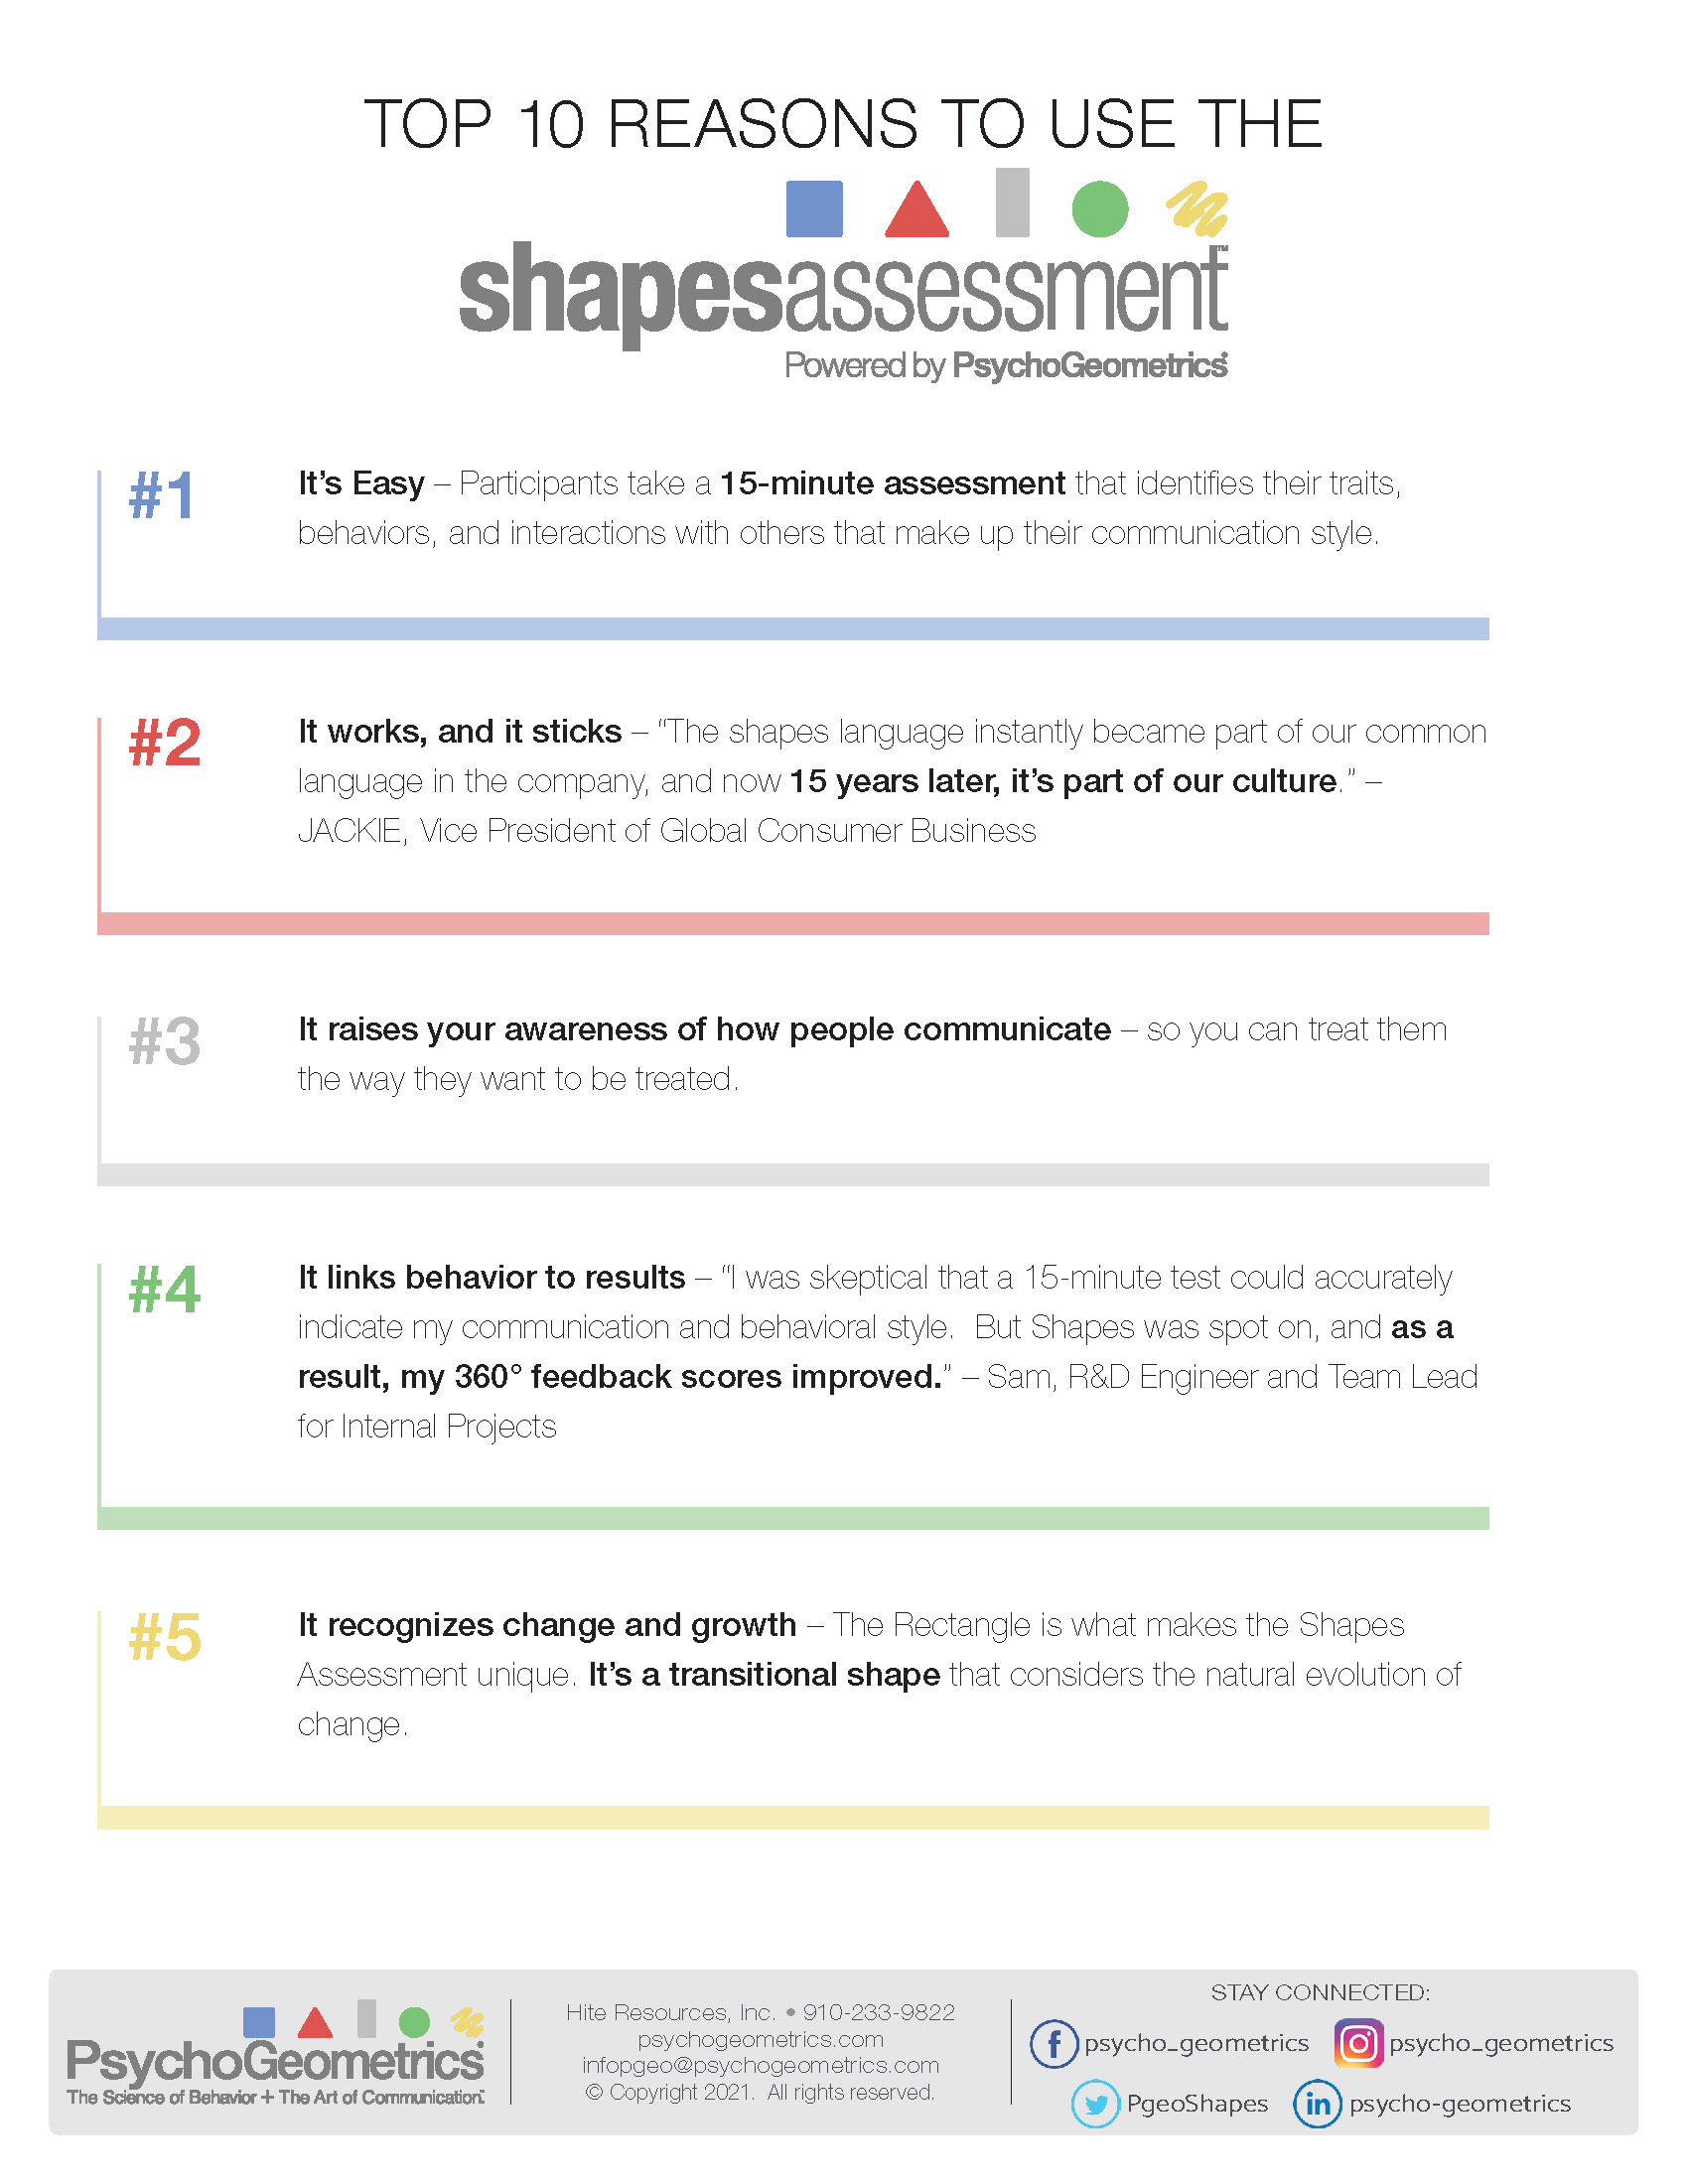 Top 10 Reasons to Use Shapes Assessment - 2 page version